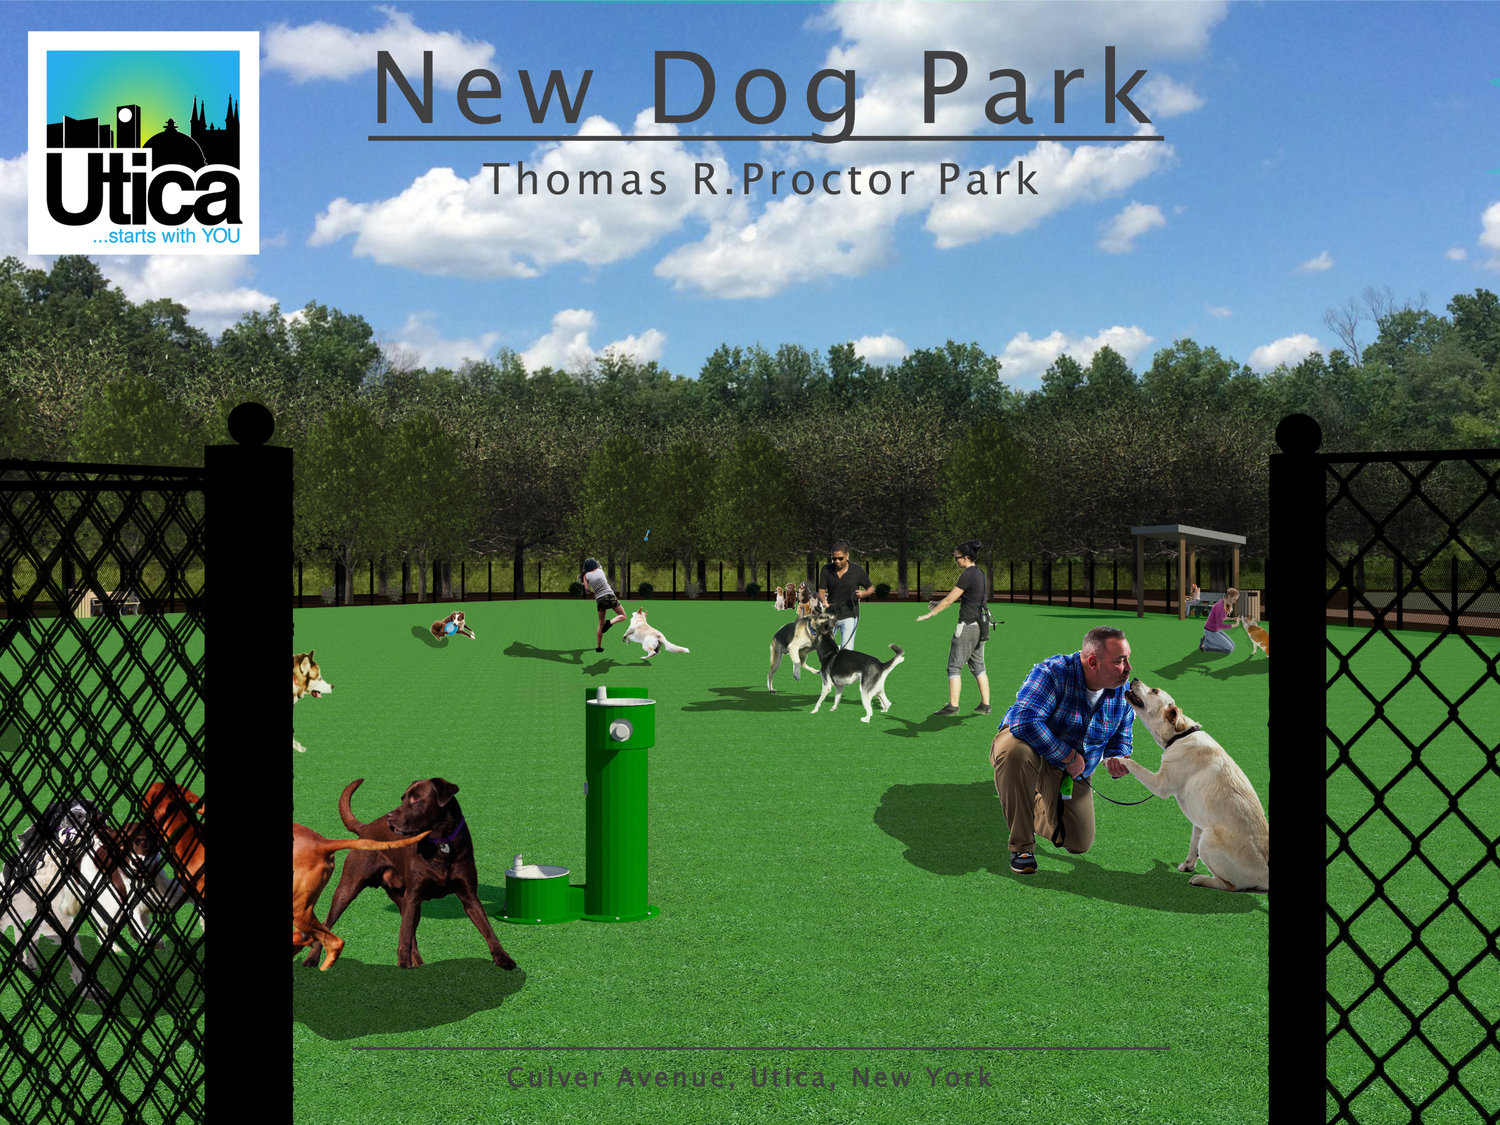 A rendering of what the T.R. Proctor Park dog park will look like.